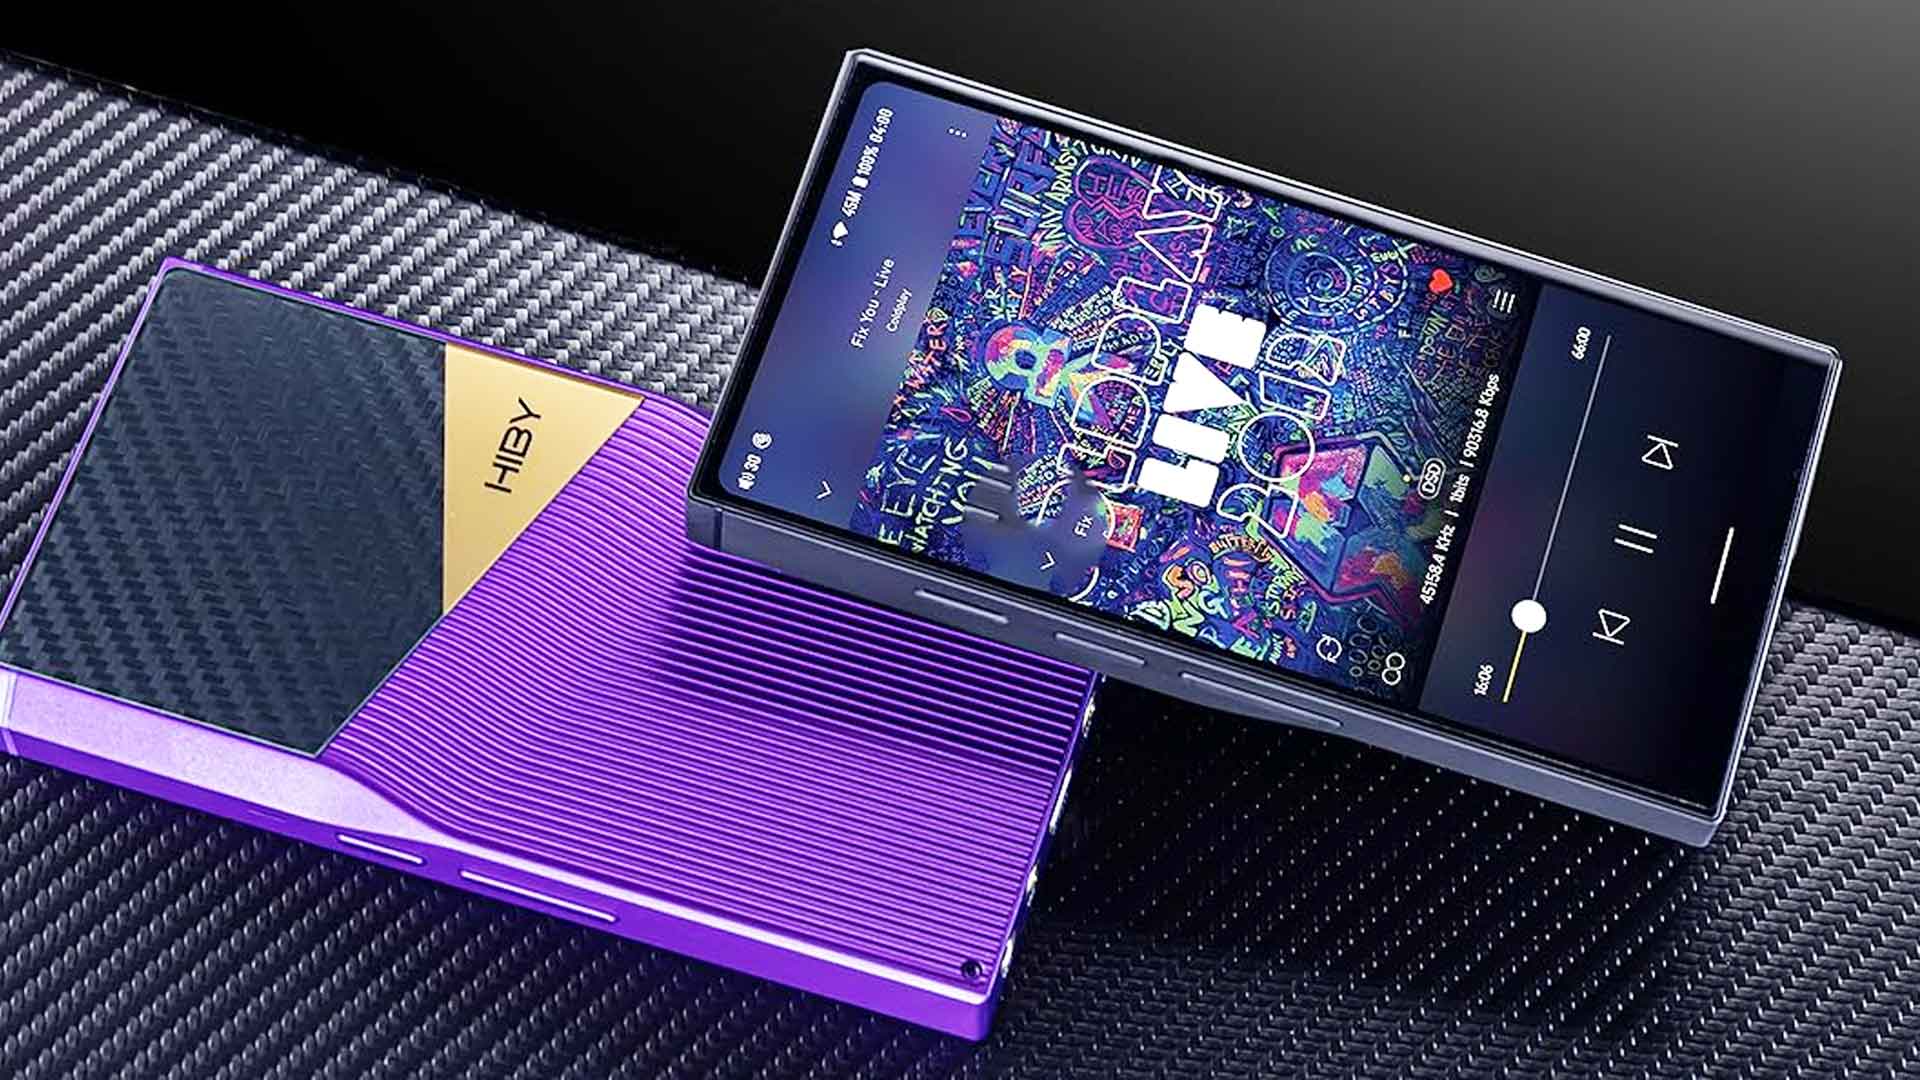 HiBy R6 Pro II review, HiBy R6 Pro II price, HiBy R6 Pro II features, HiBy R6 Pro II specs, HiBy R6 Pro II portable music player, Hi-Fi music player, Hi-Res audio, portable amp, portable amplifier, Android music player, best portable music player